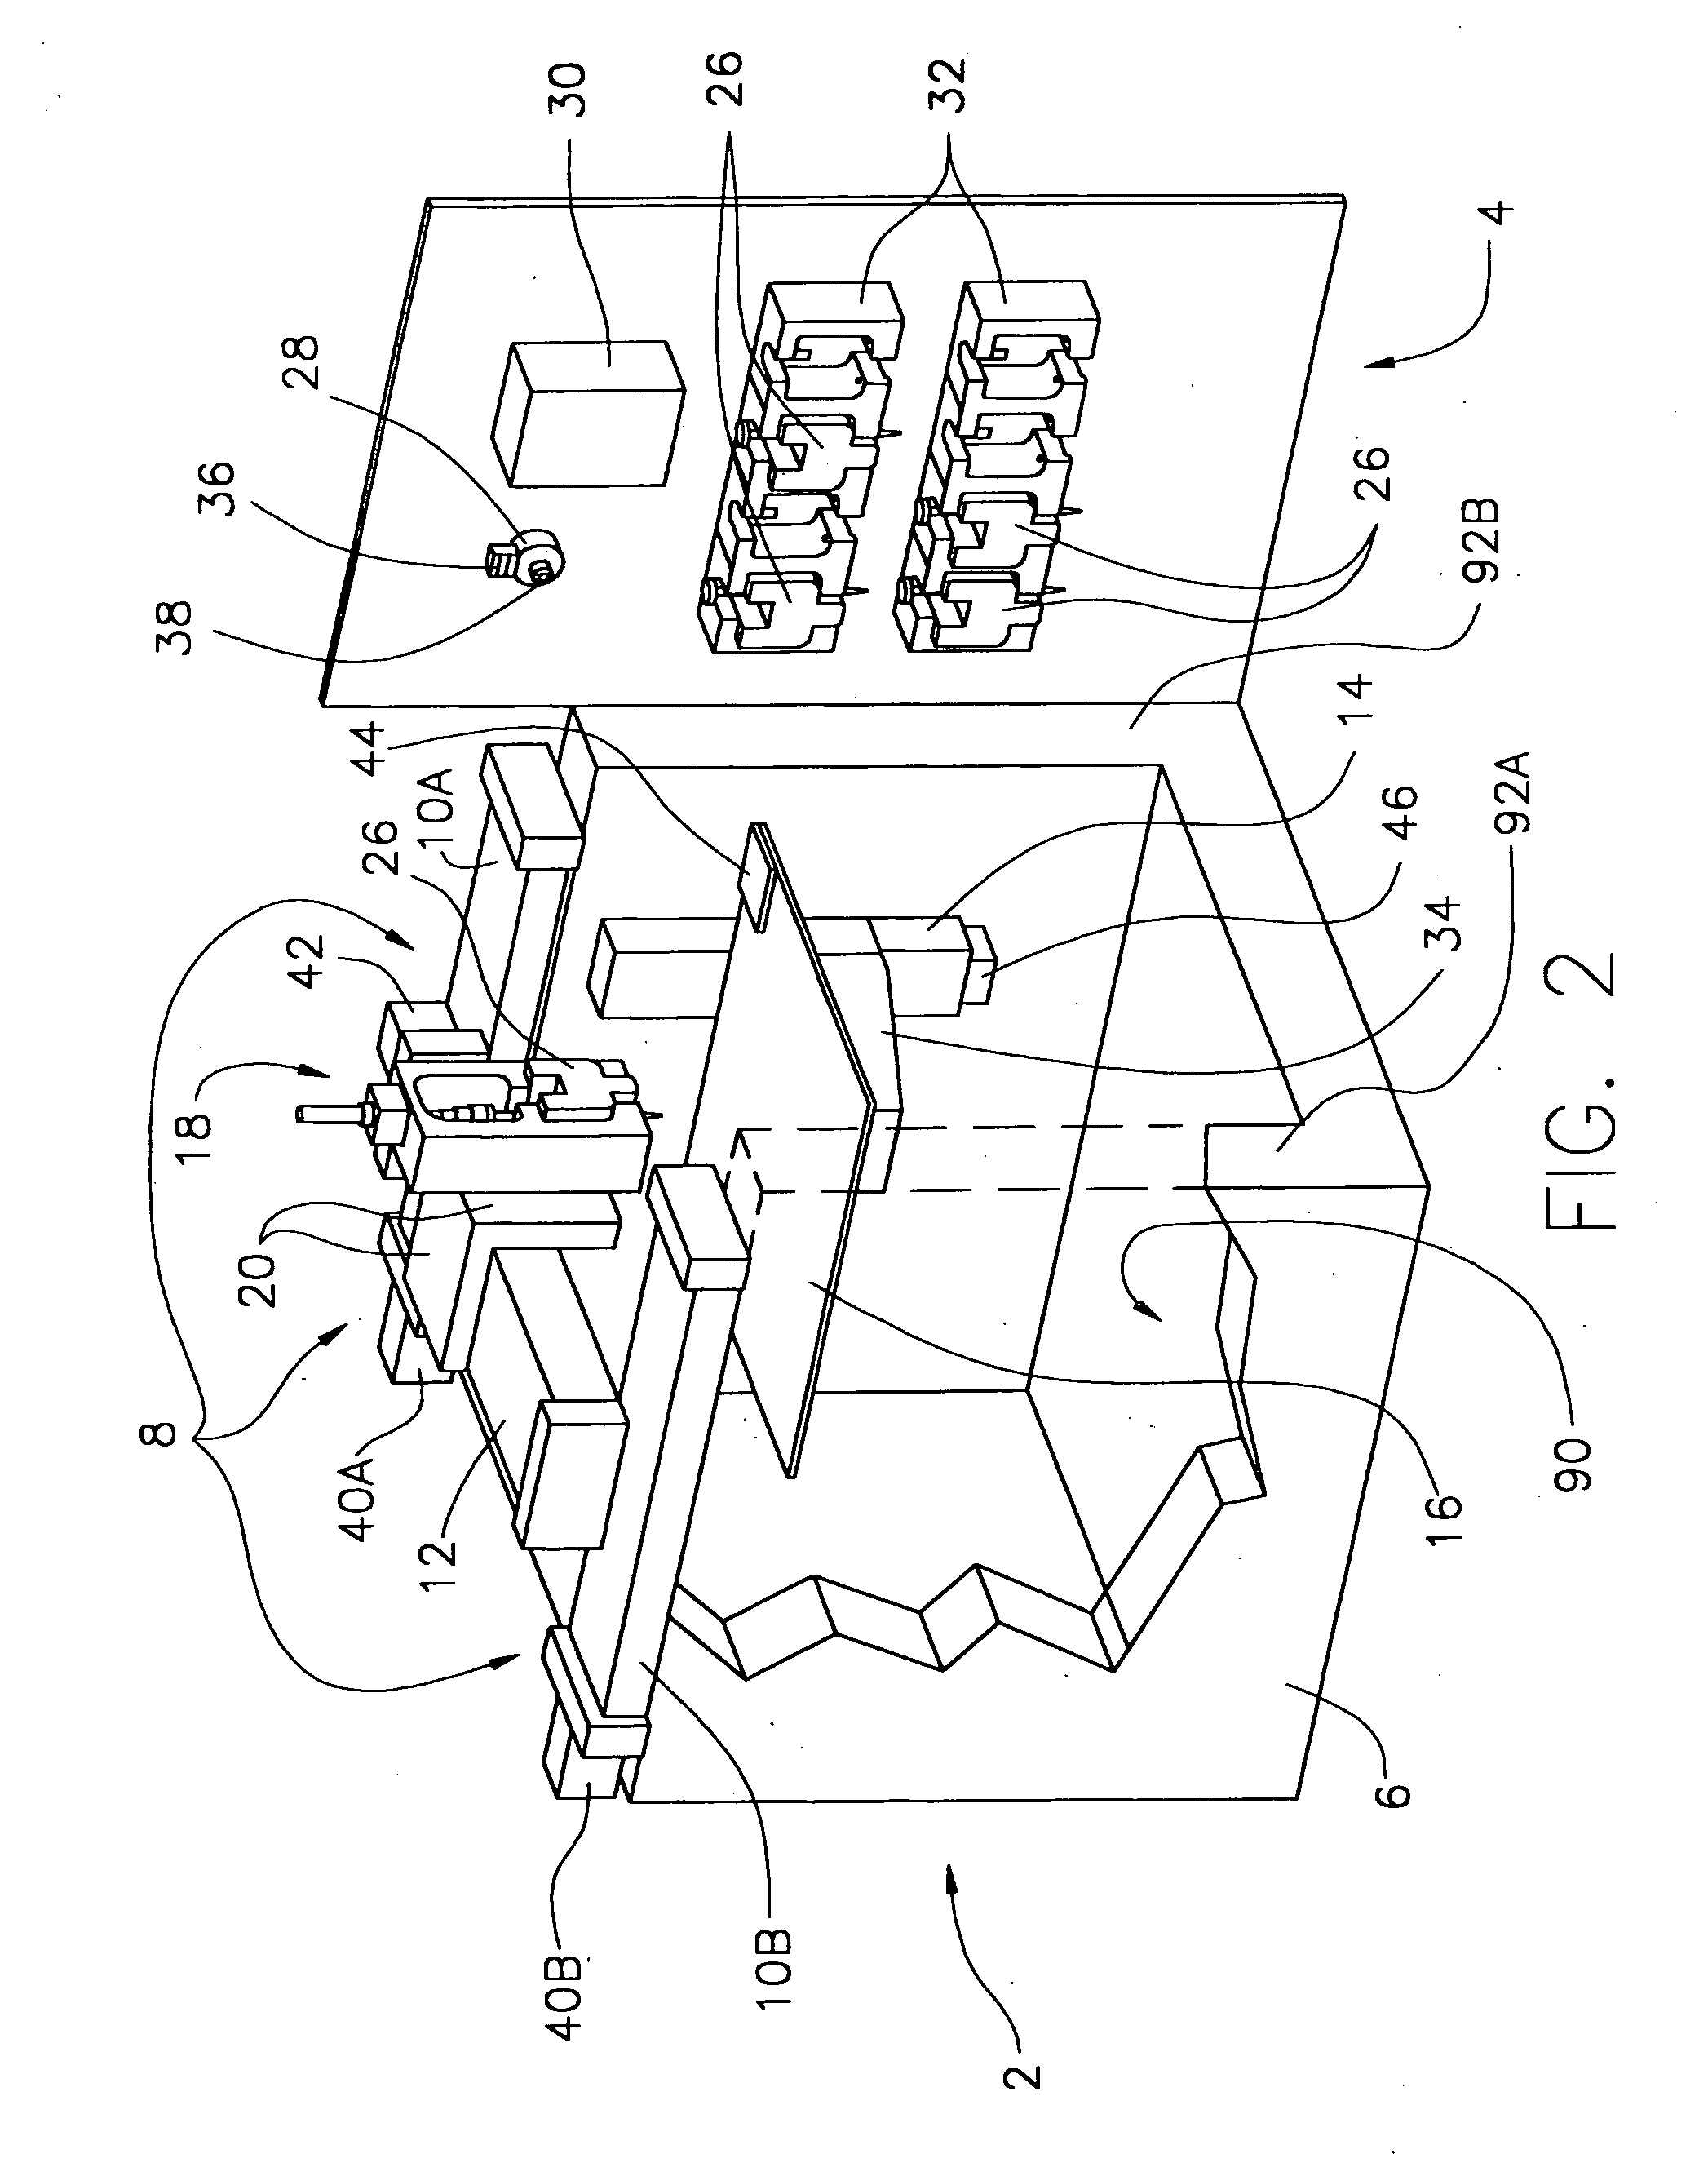 Modular fabrication systems and methods